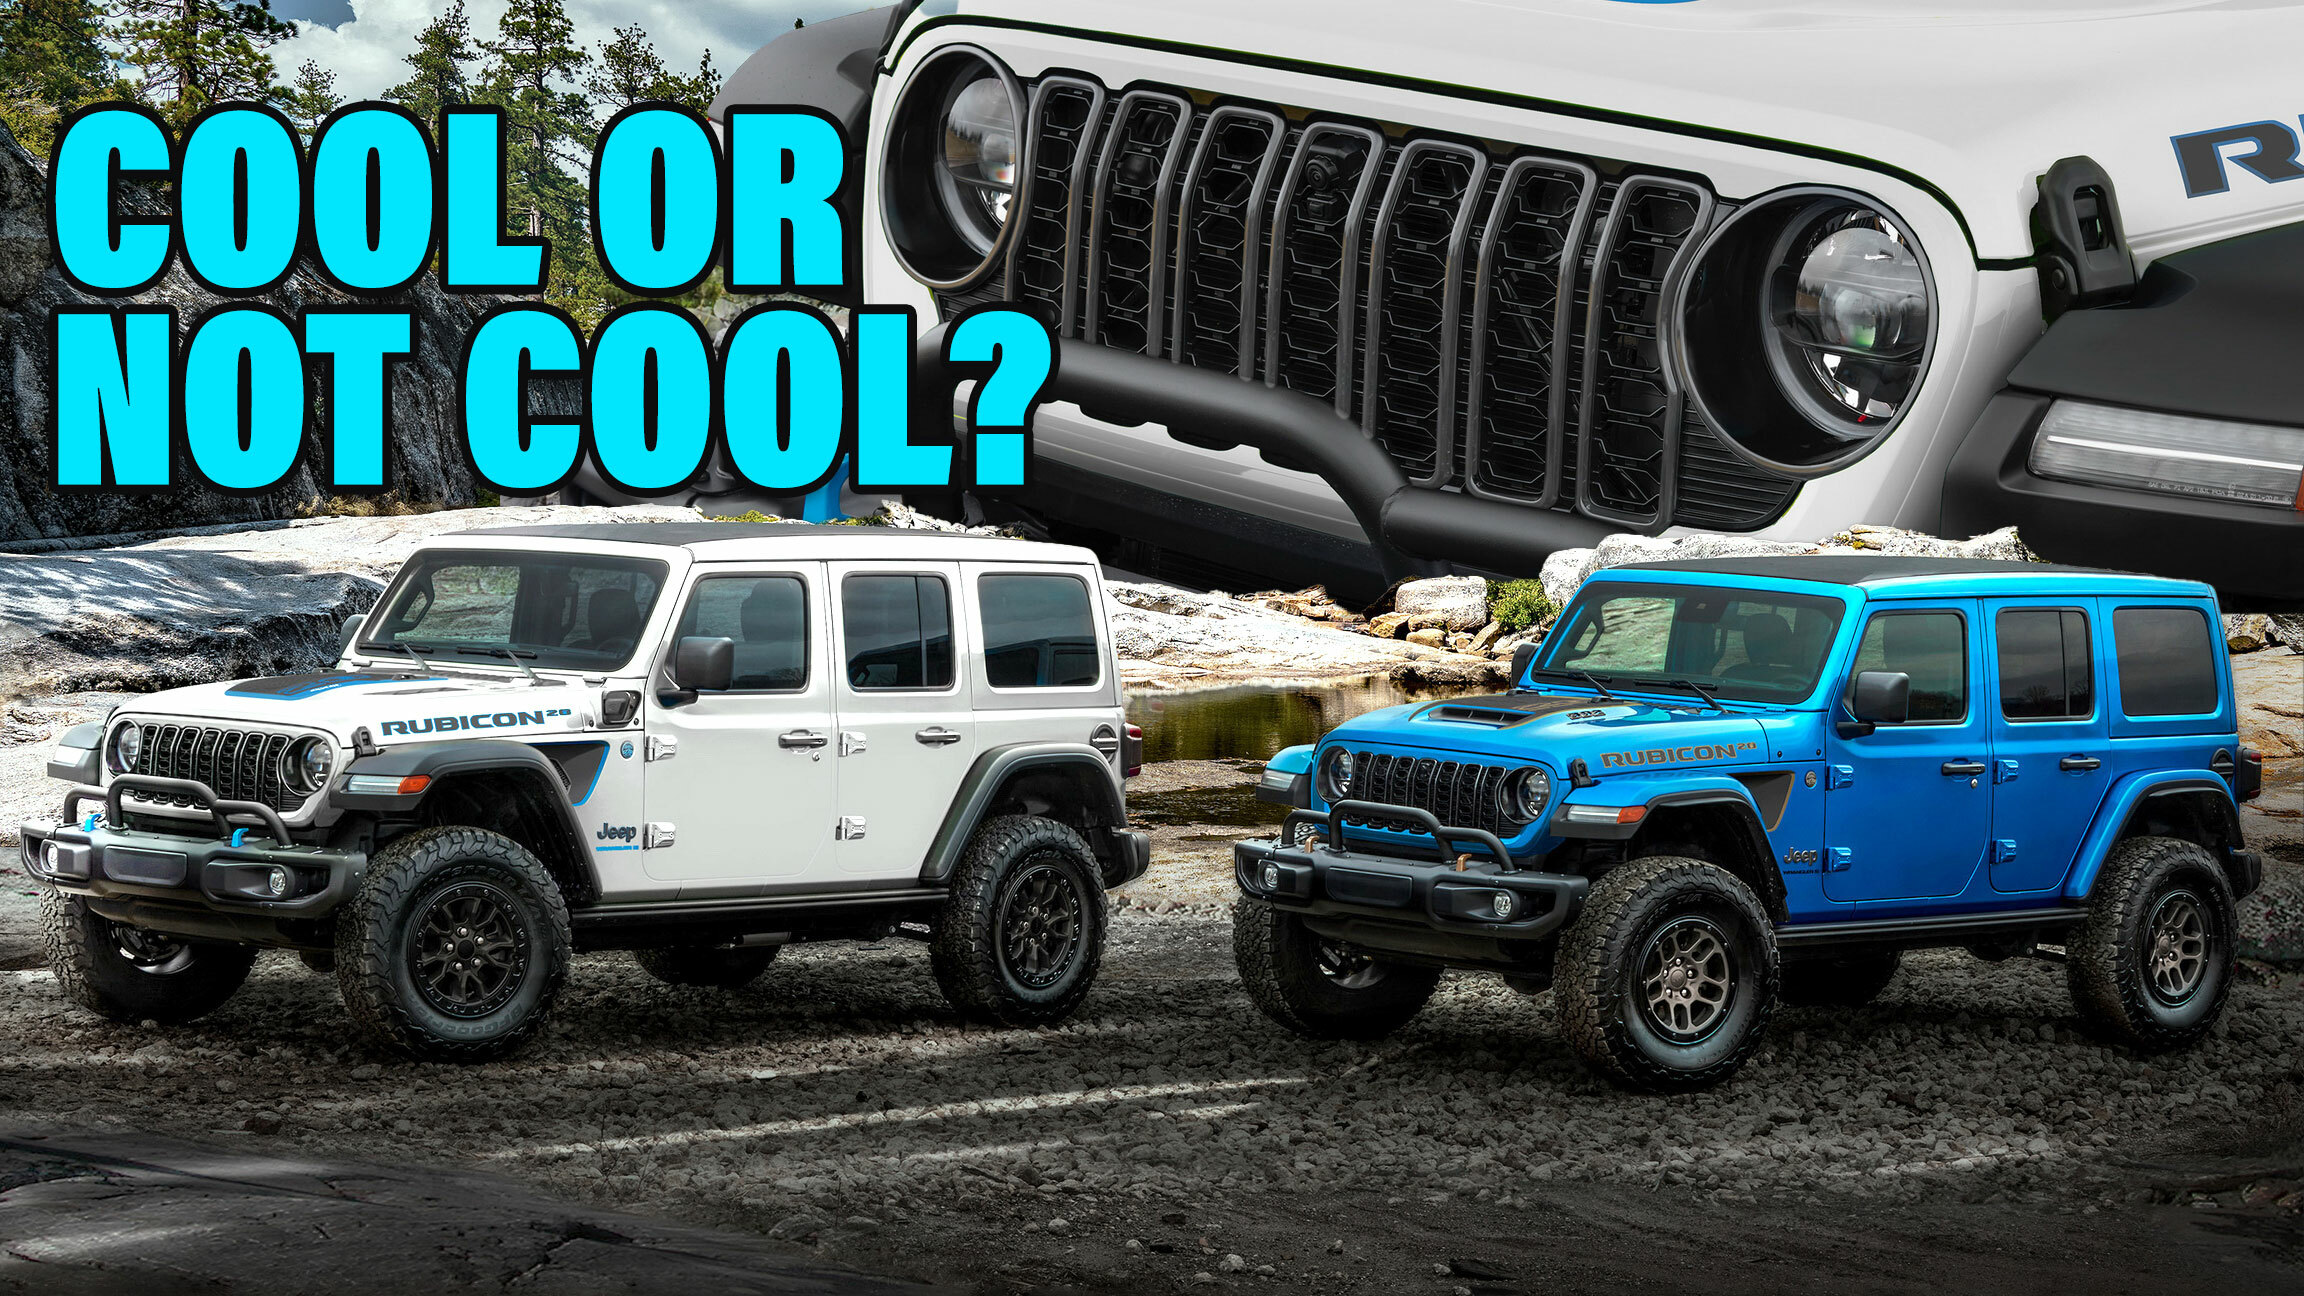 Thoughts On Jeep's New Seven-Slot Grille On The Wrangler Rubicon 20th Ann.  Editions? | Carscoops